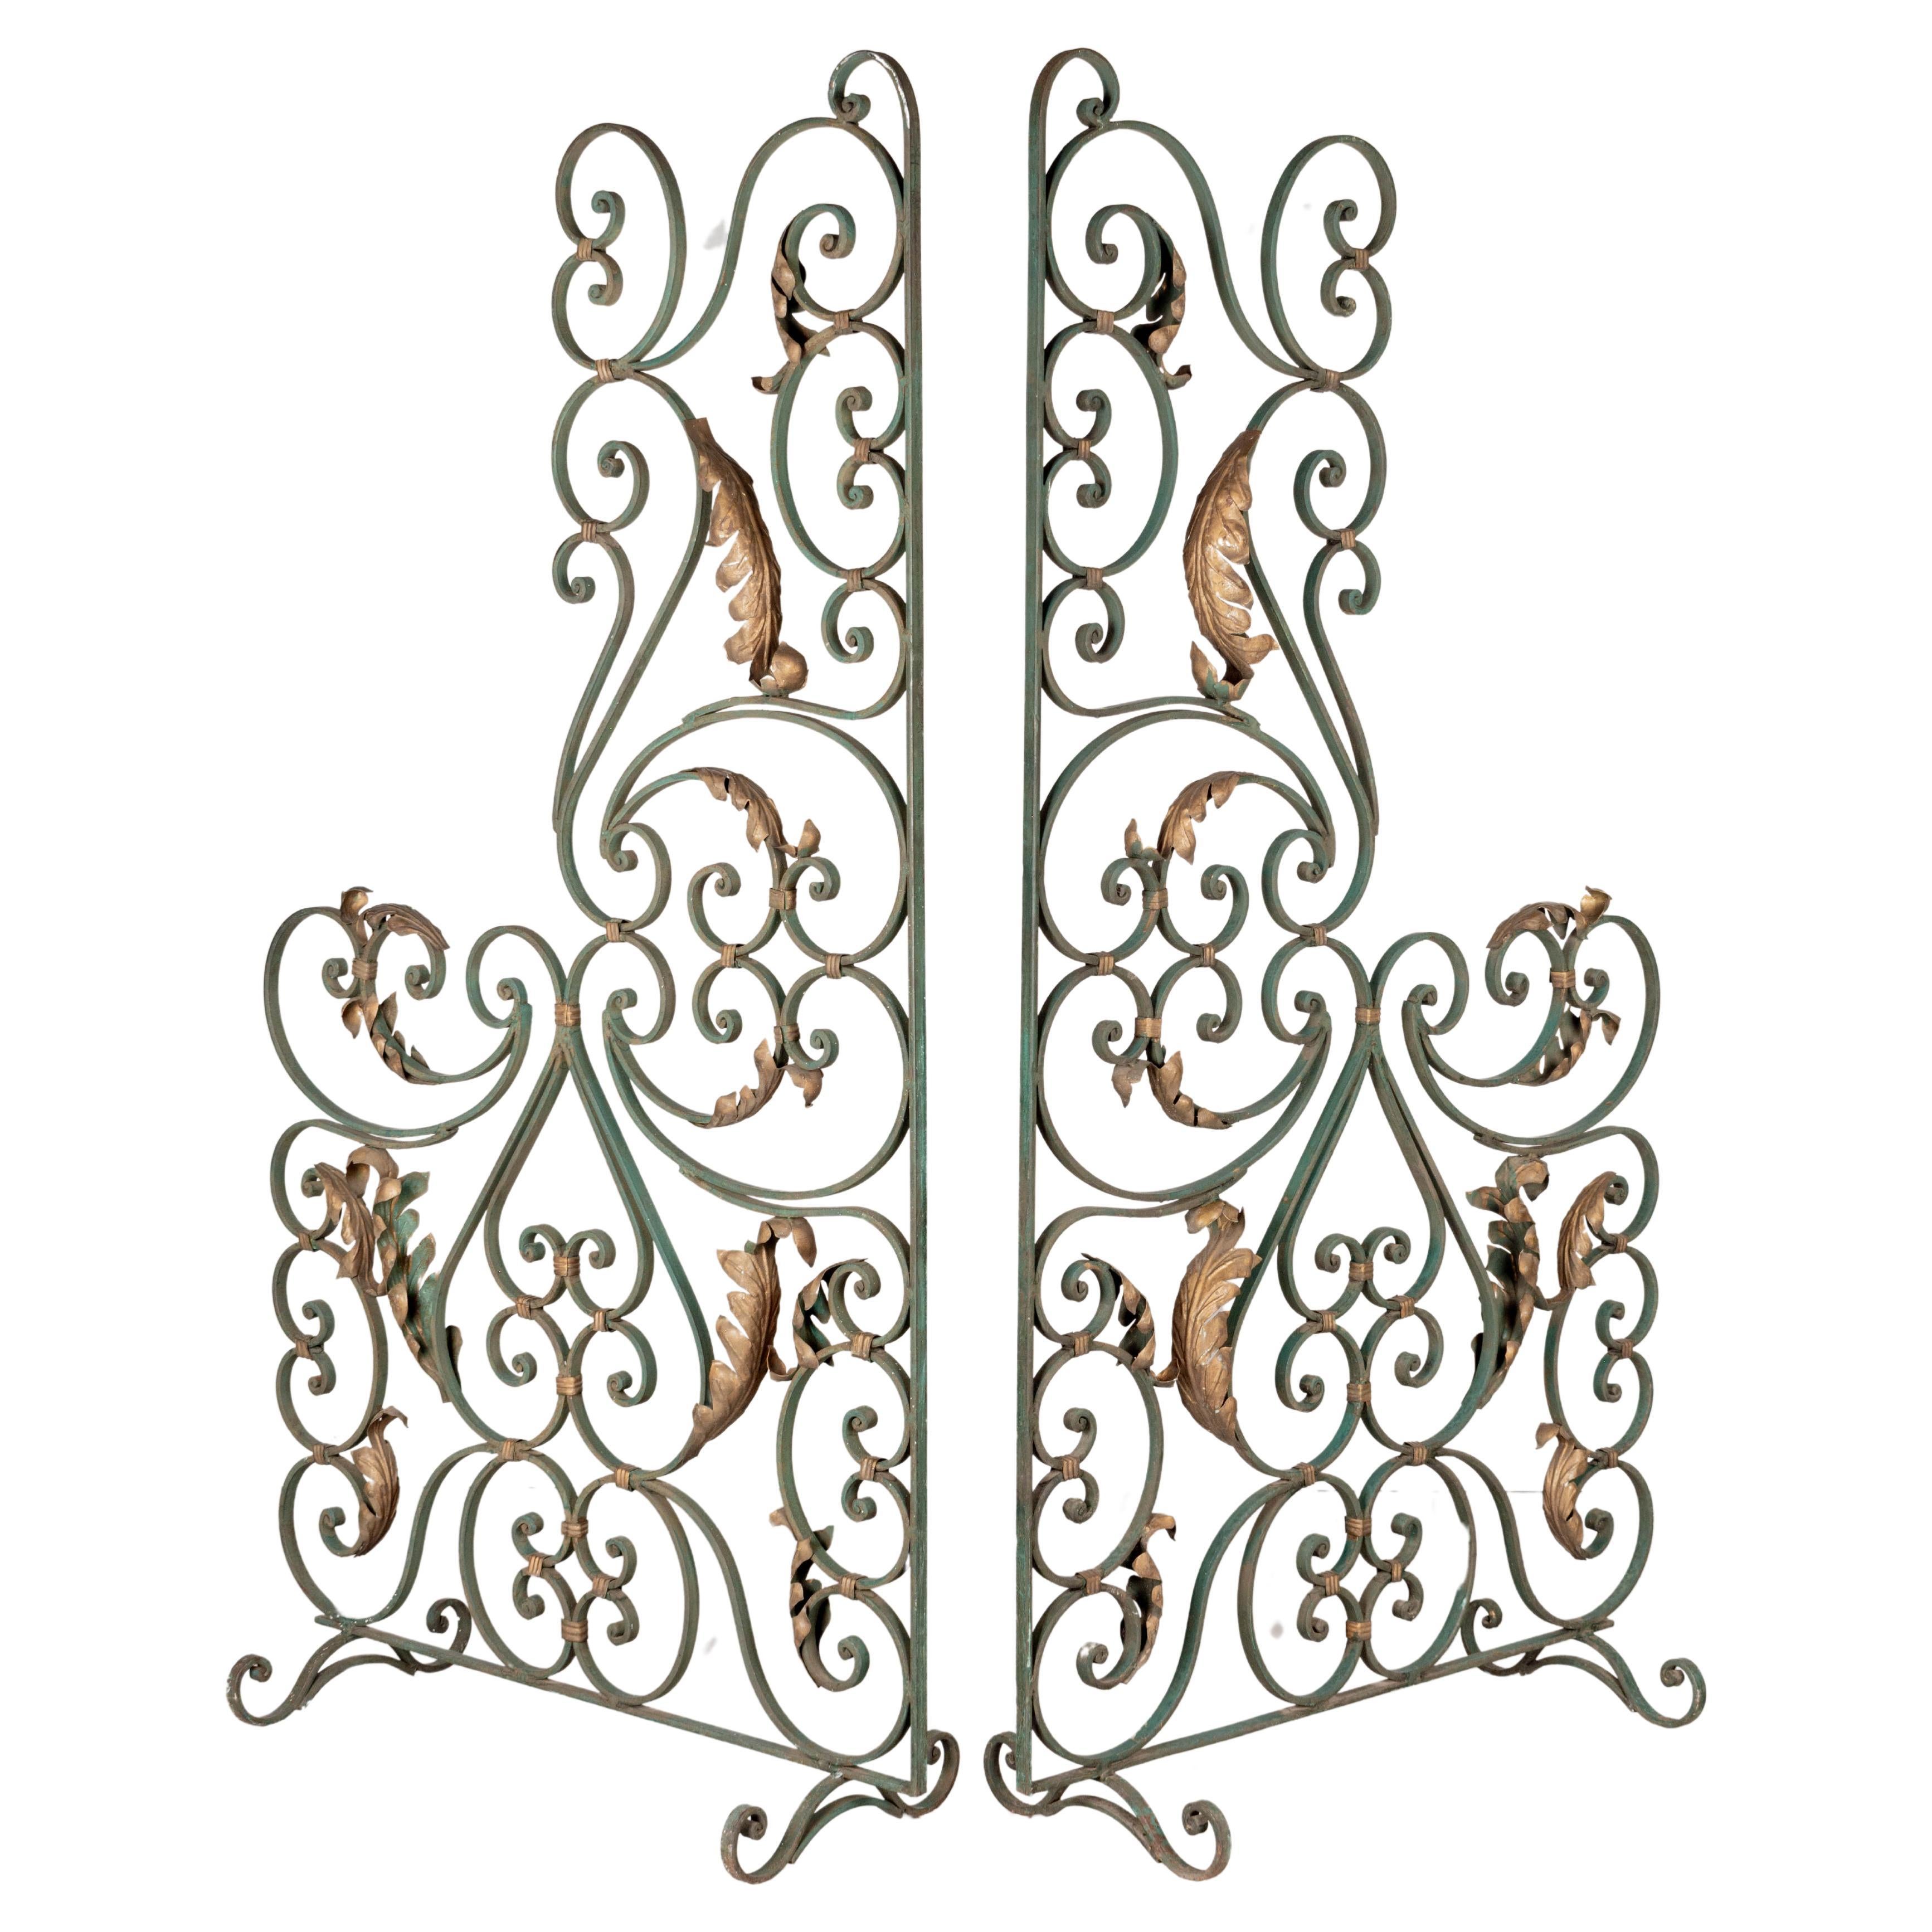 Pair of French Wrought Iron Screens or Room Dividers For Sale